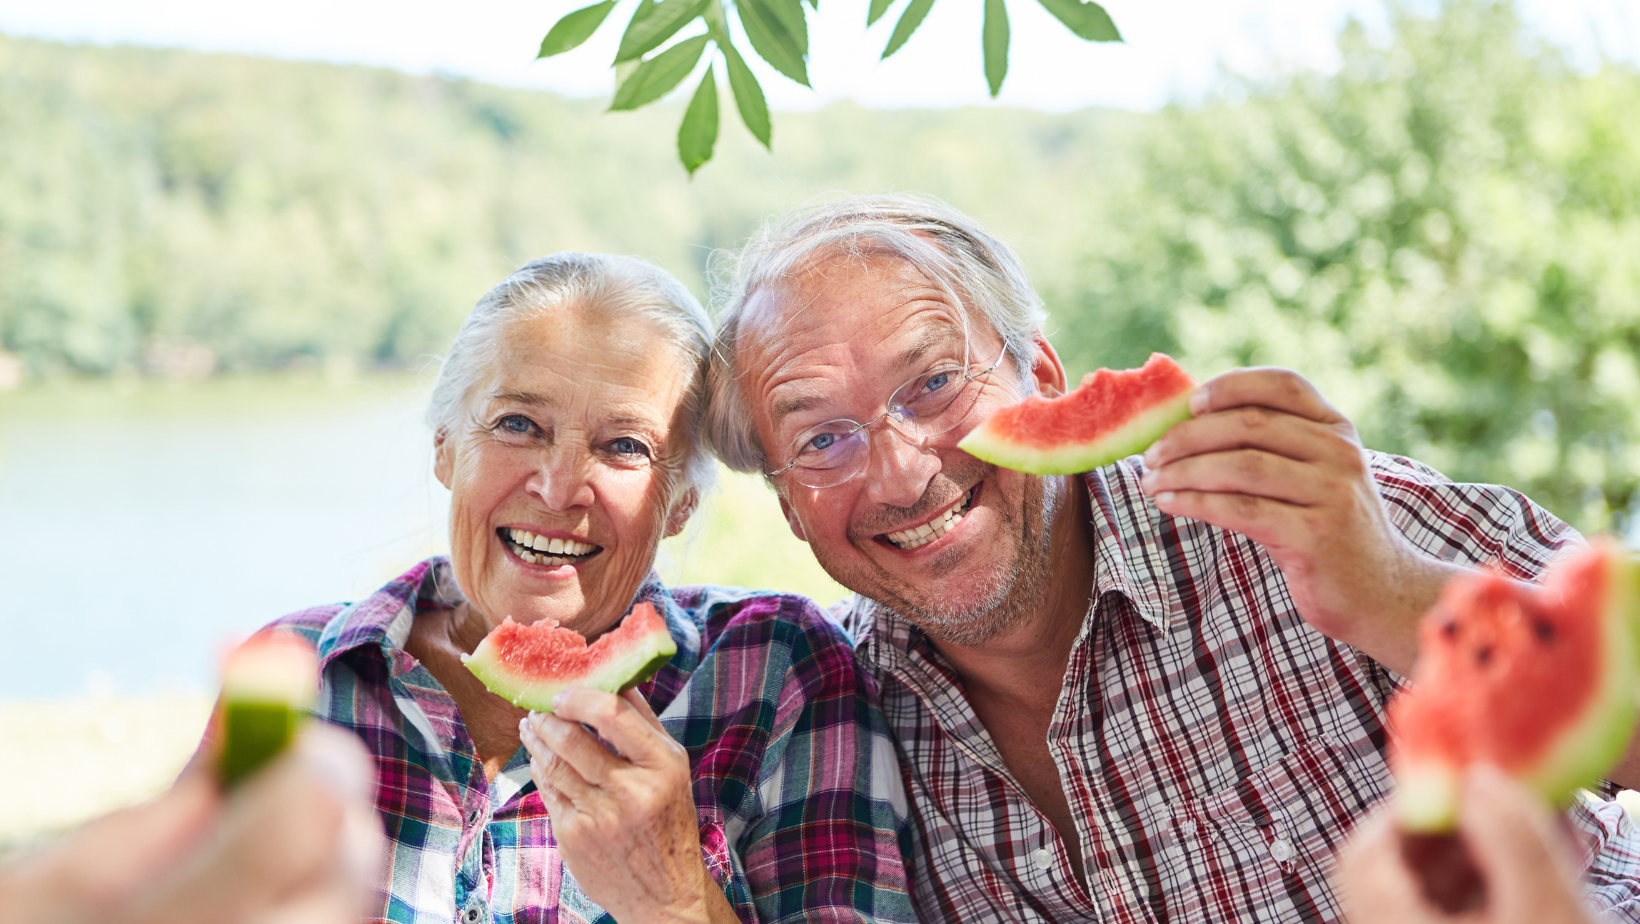 An elderly man and woman happily eating some watermelon